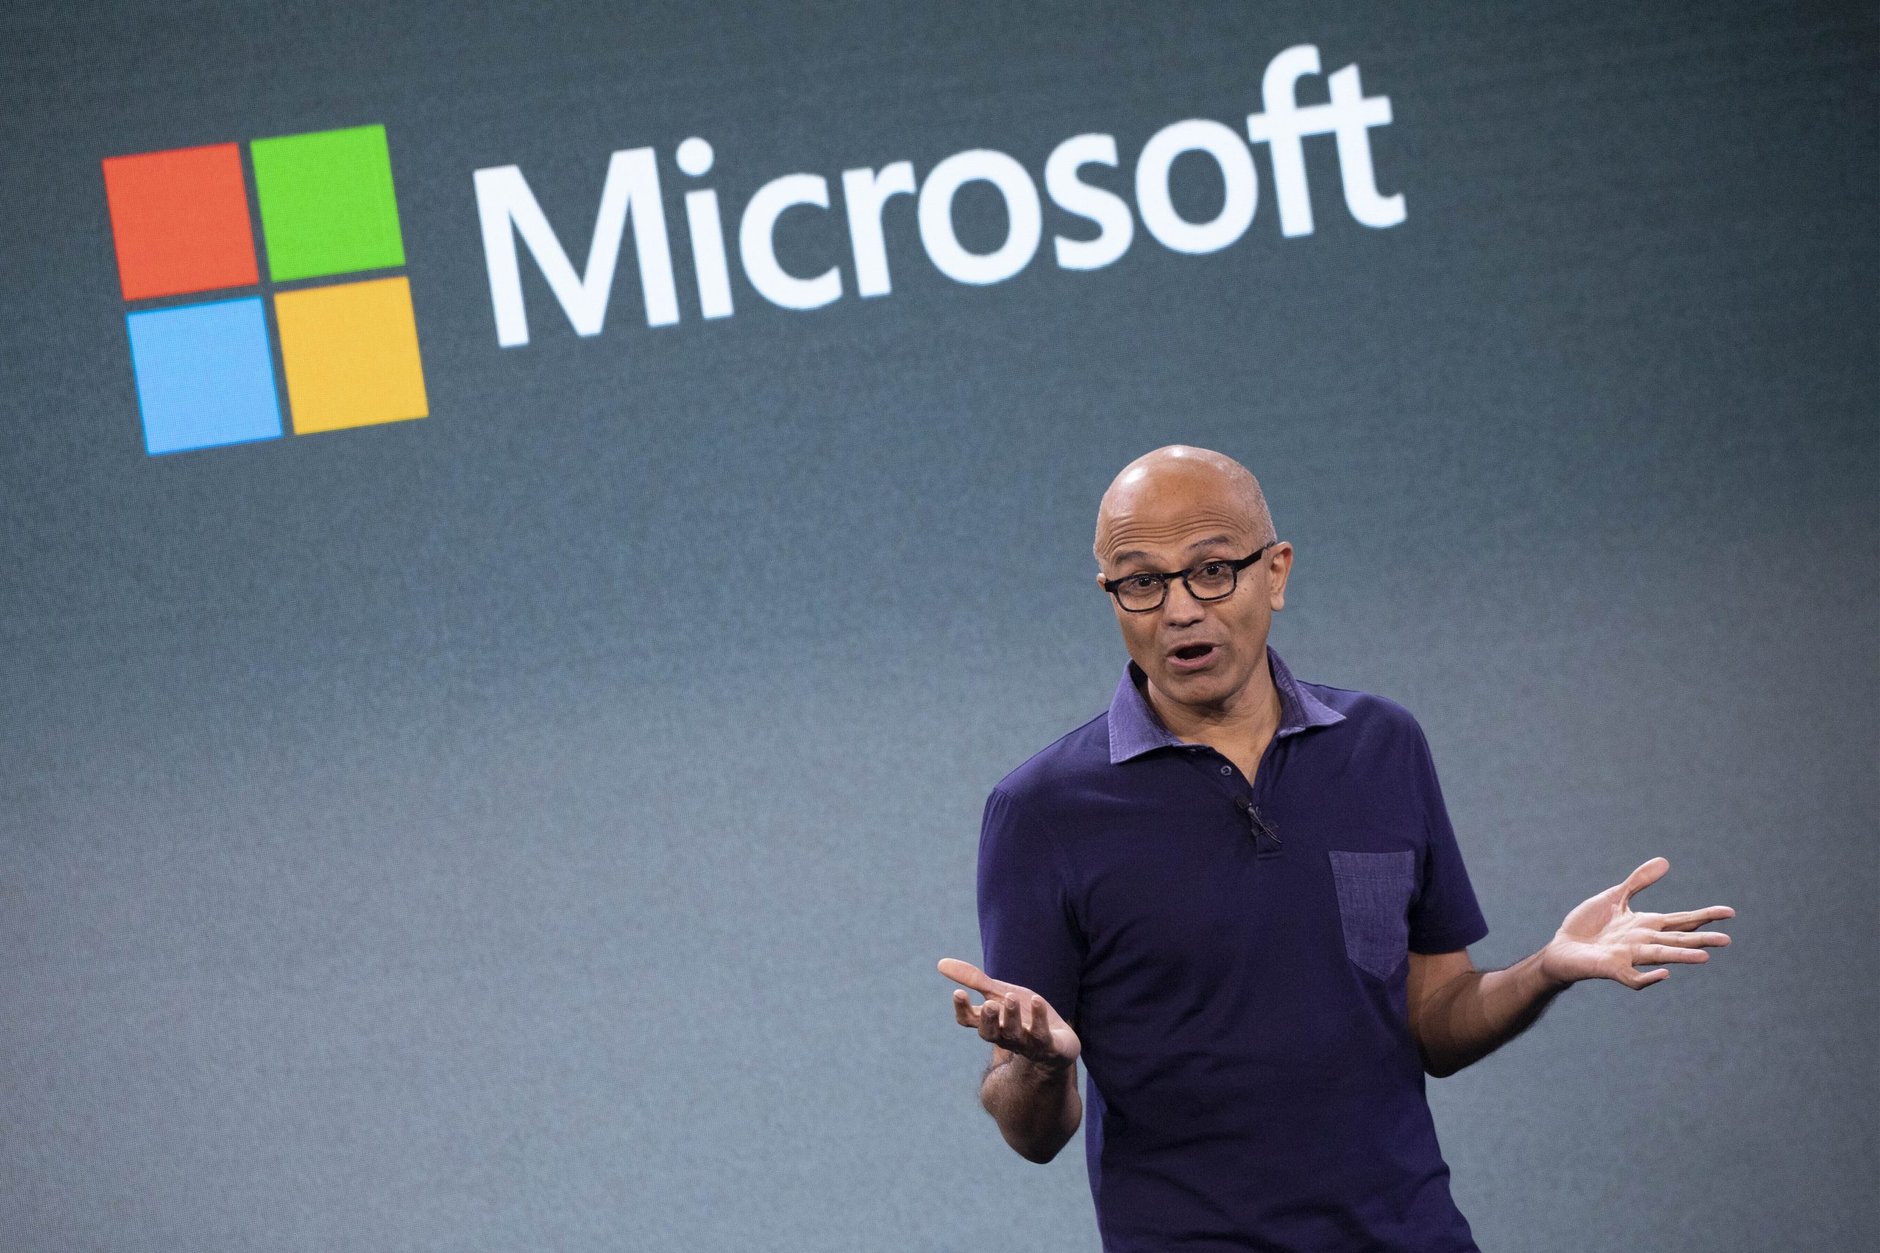 Microsoft gaming CEO details arms race with Sony, as FTC moves to prevent  Activision purchase | Courthouse News Service